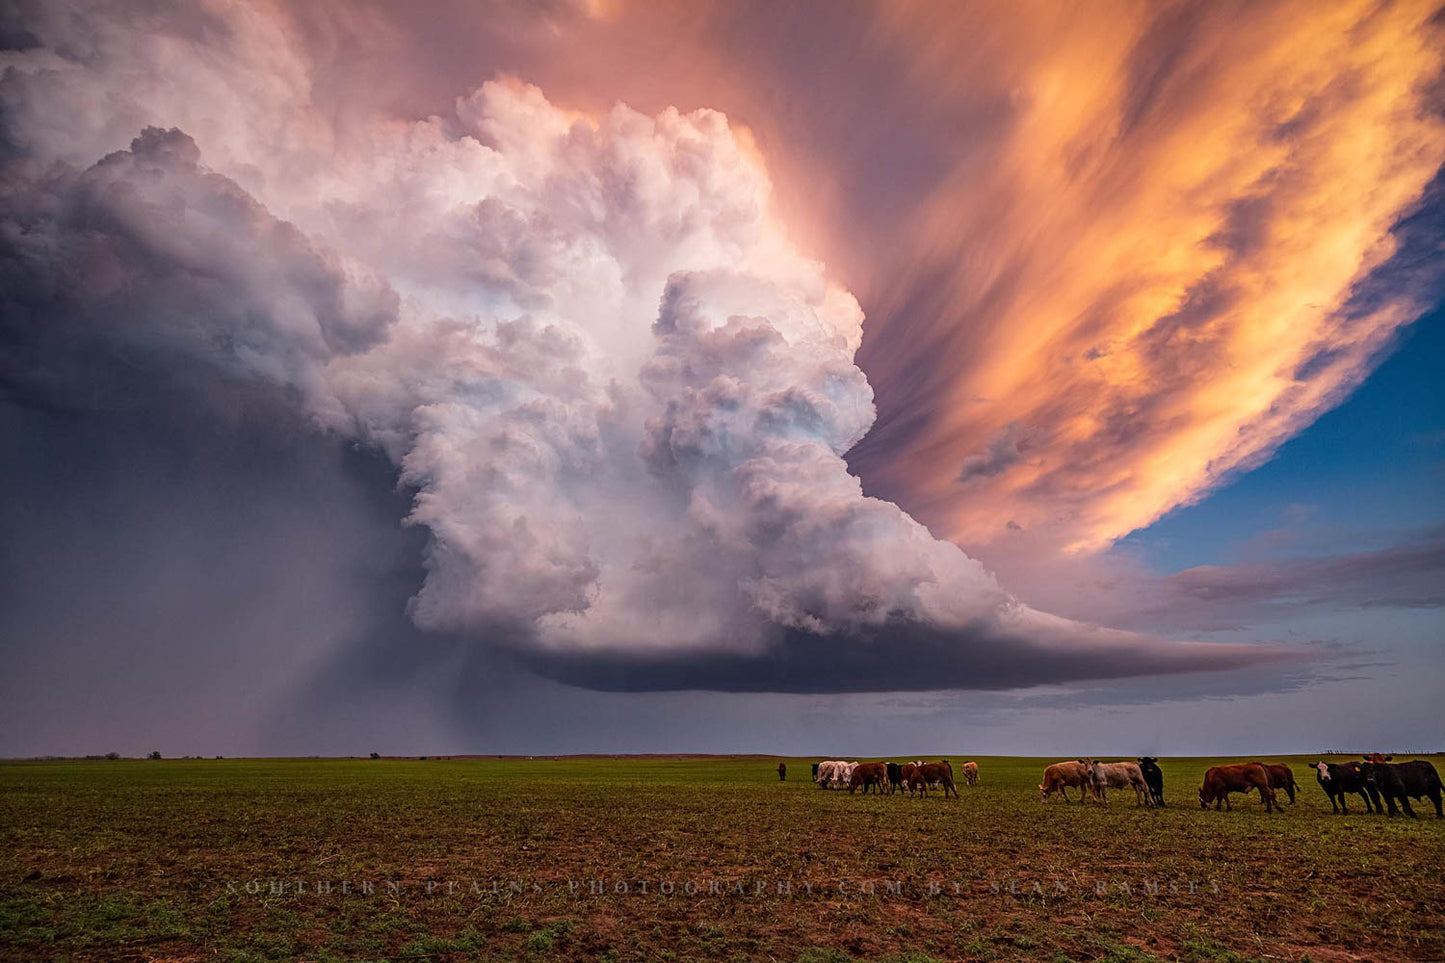 A supercell thunderstorm erupts over a field full of cattle on a stormy spring evening in Kansas.